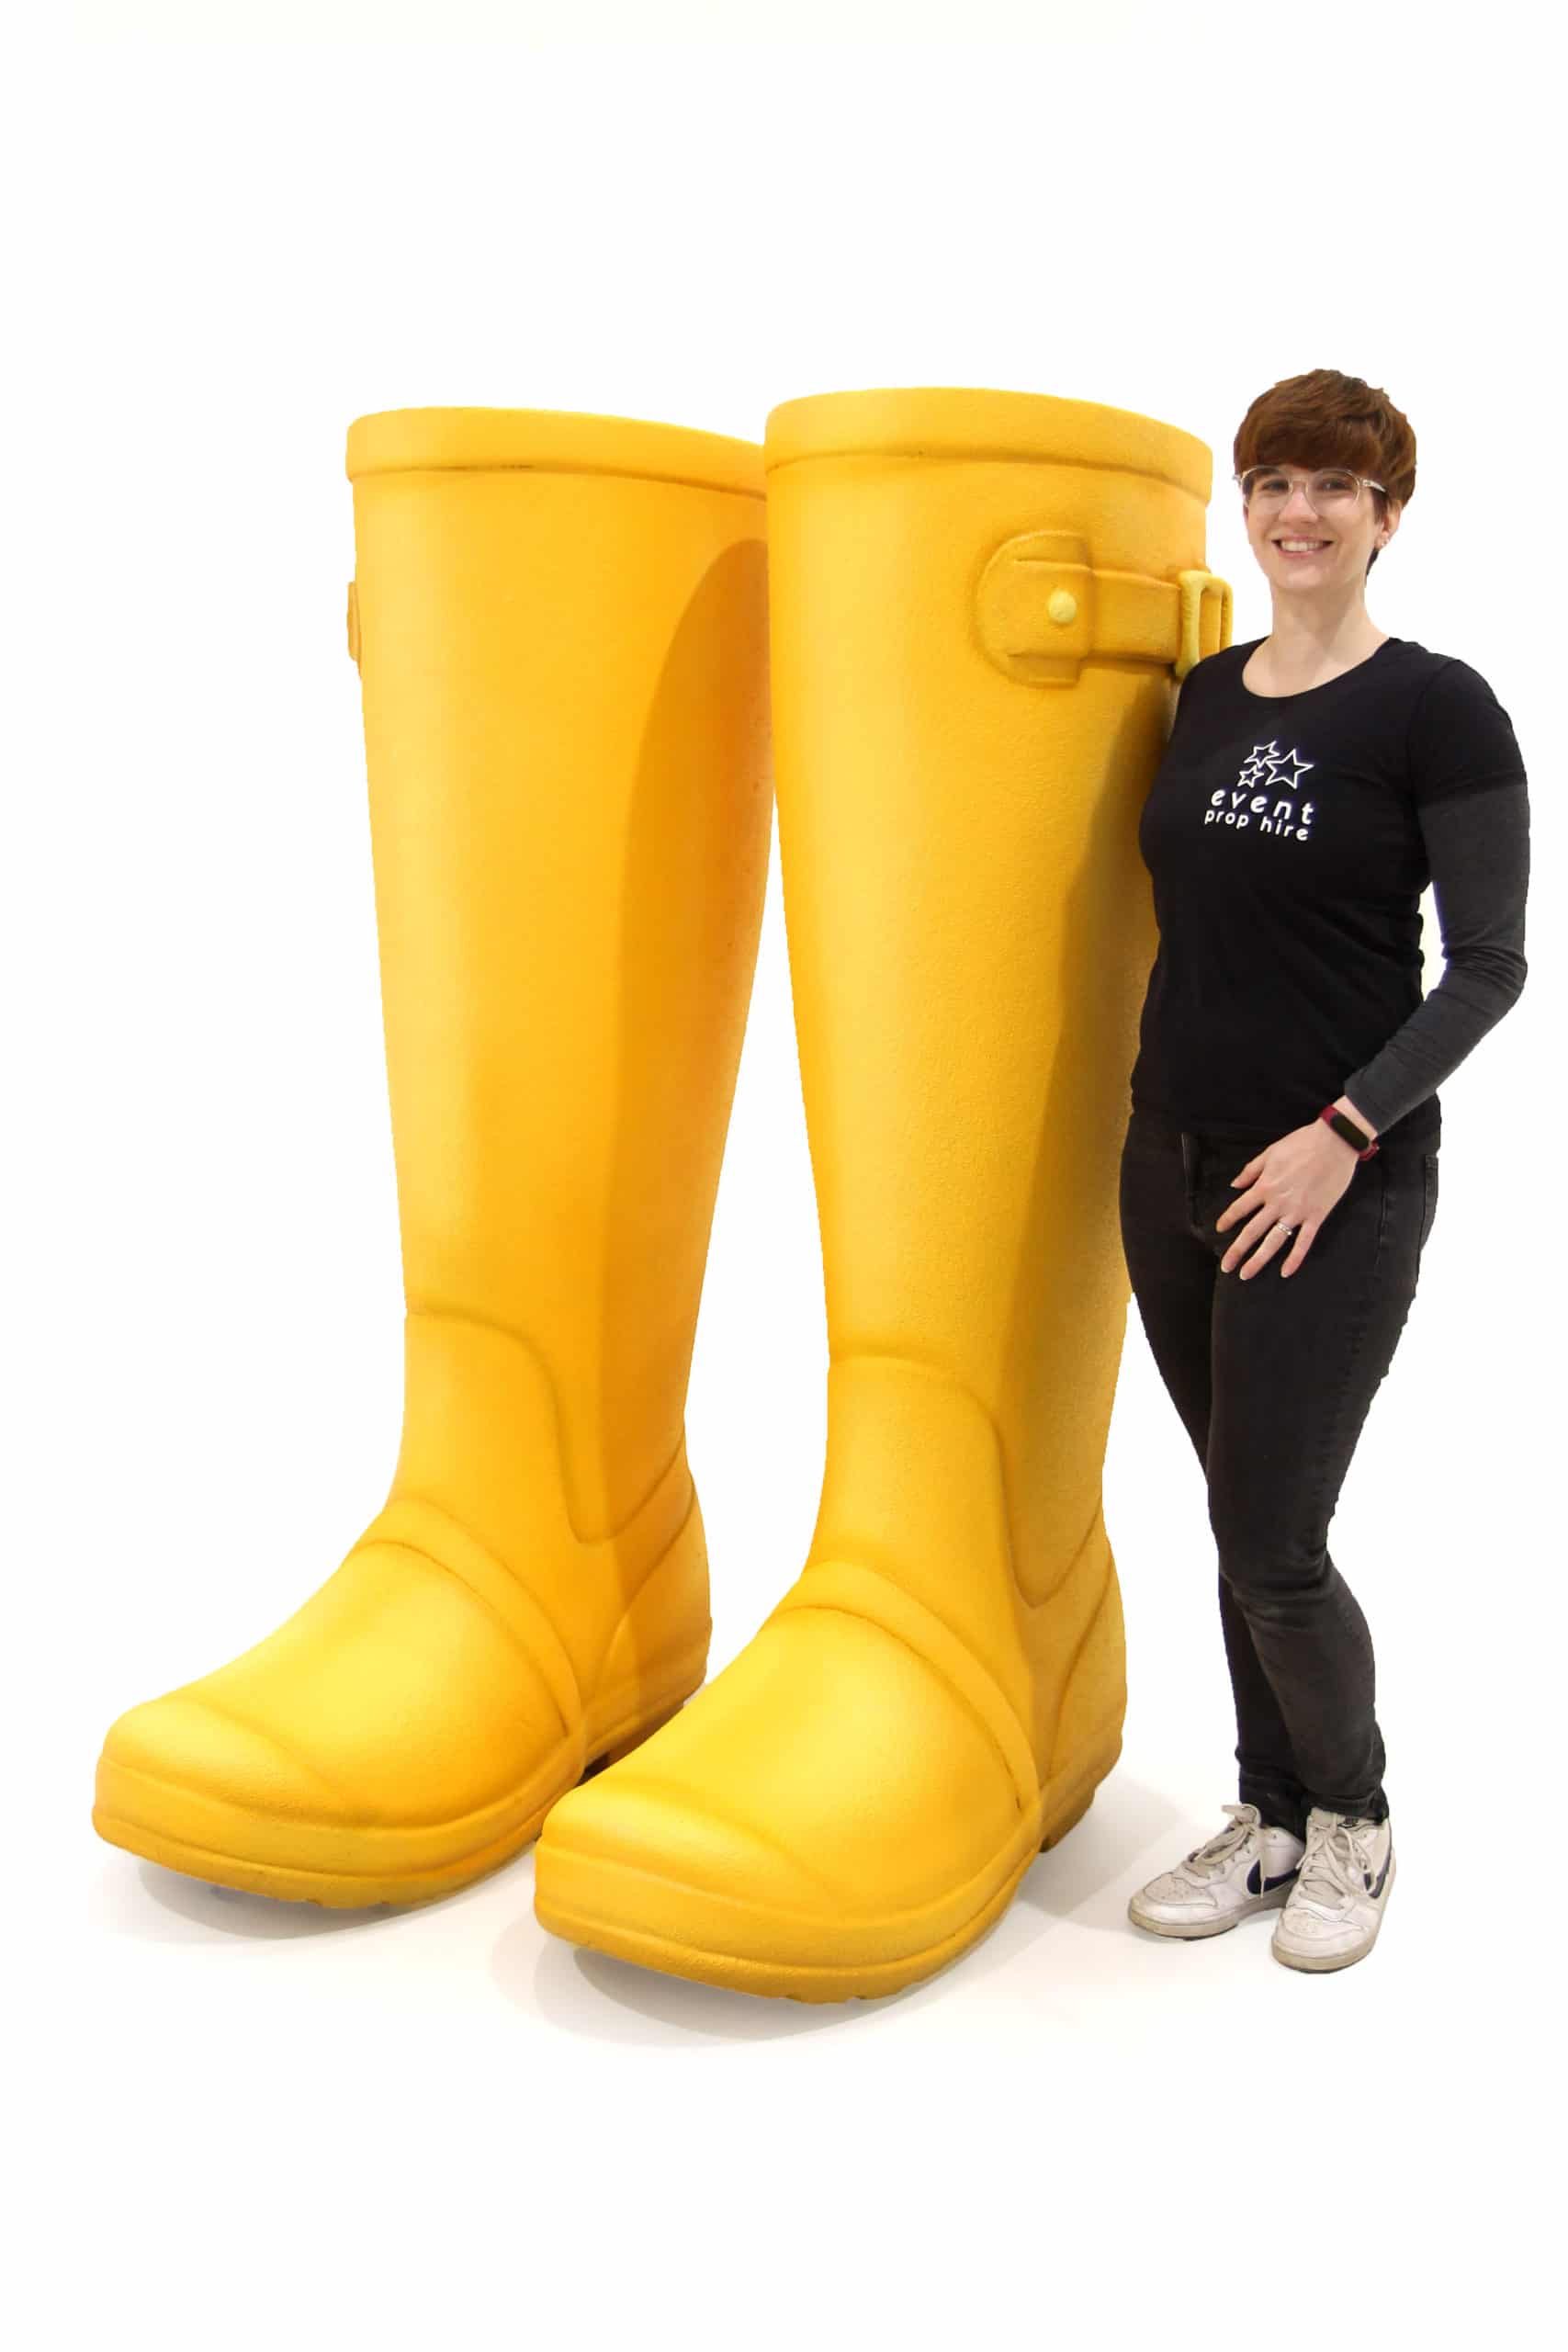 Giant Yellow Welly Boots (Pair)